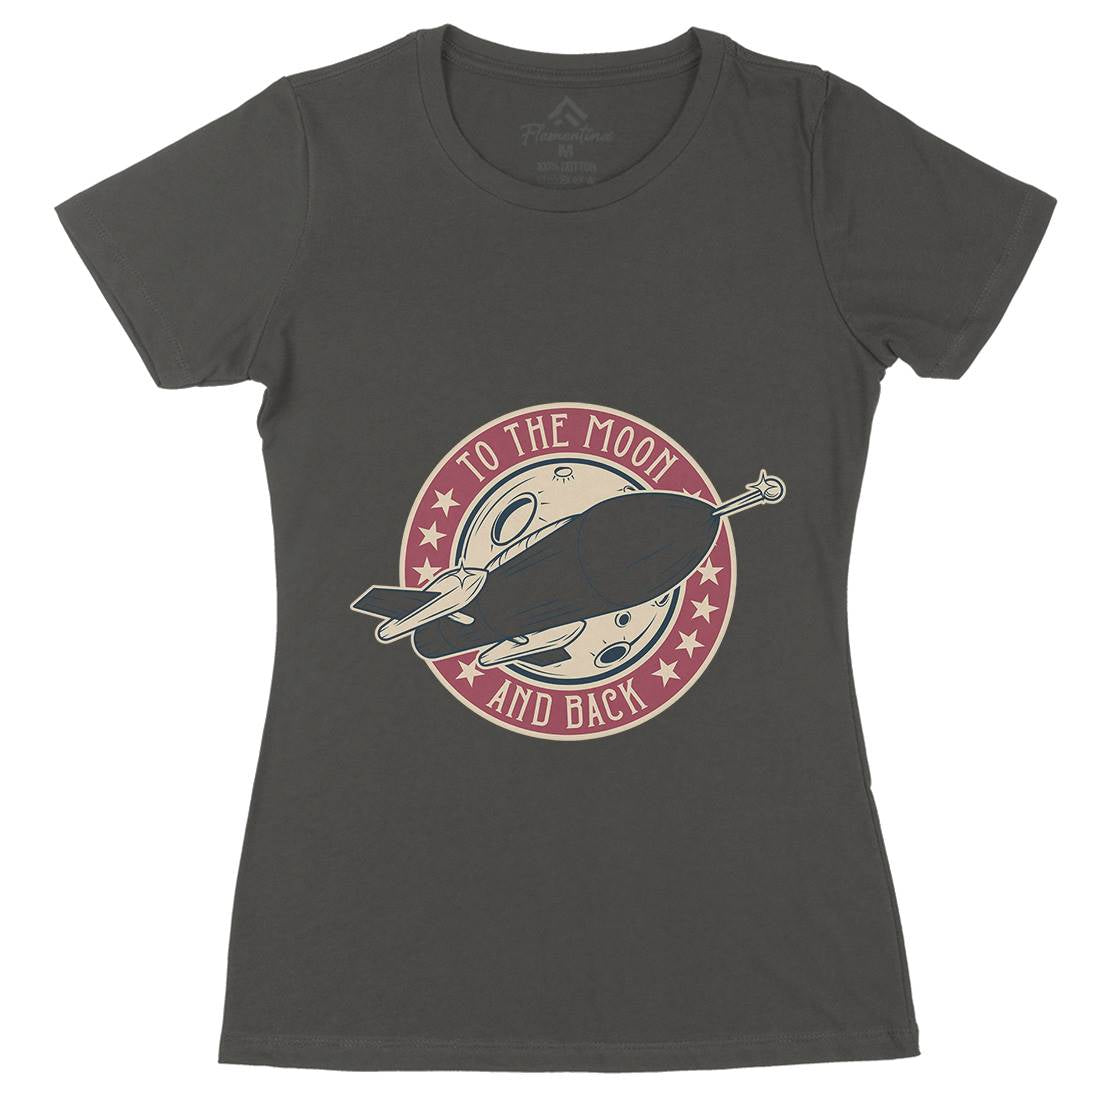 To The Moon Womens Organic Crew Neck T-Shirt Space D993